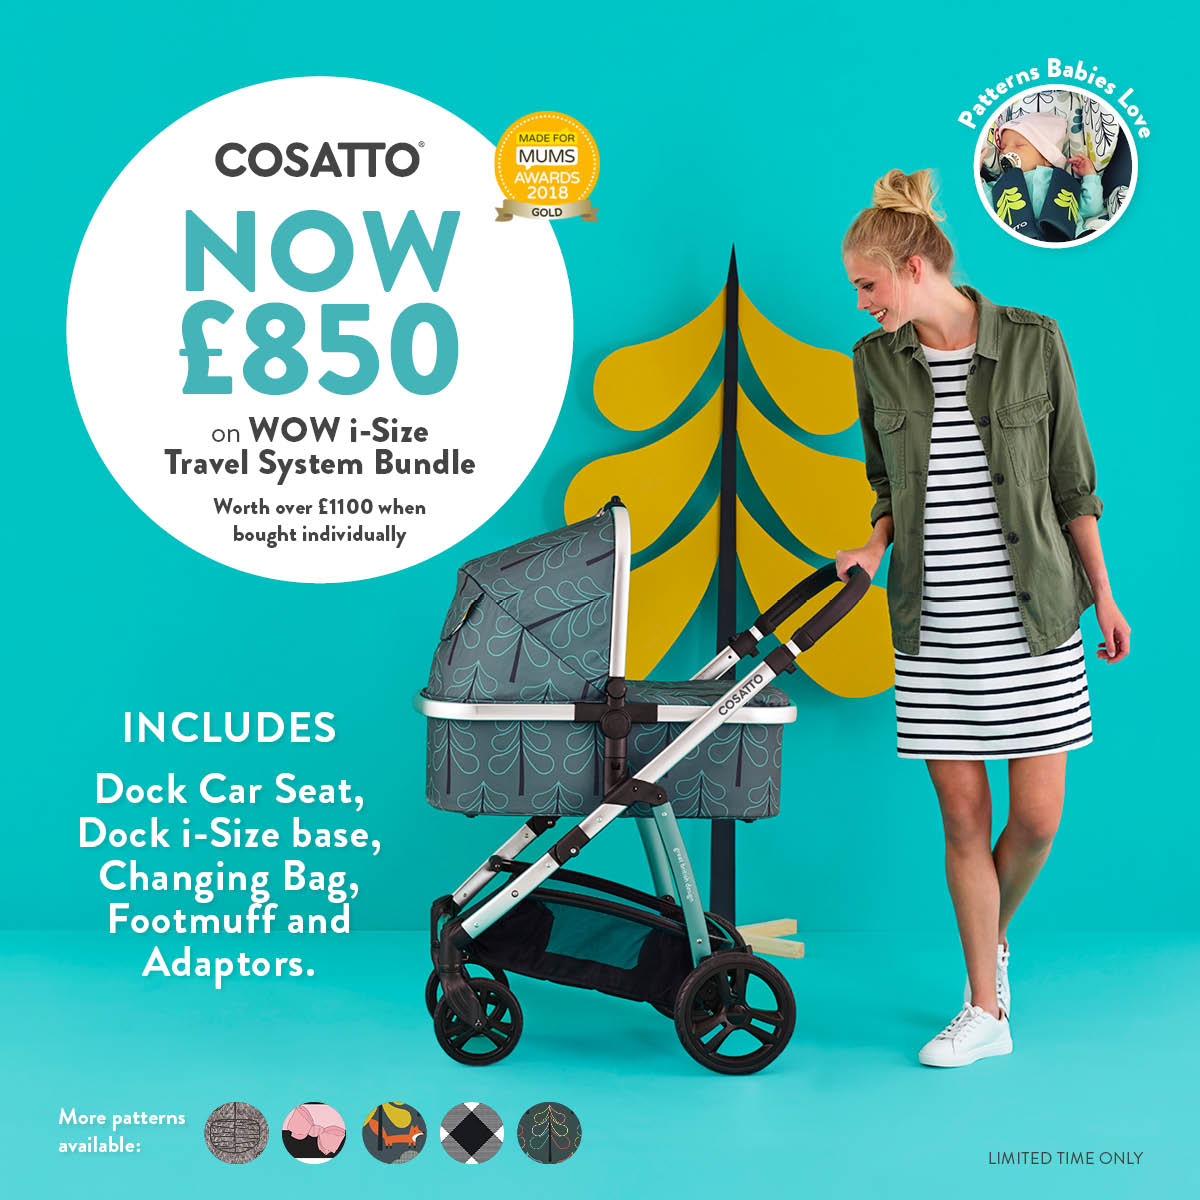 New Cosatto giggle quad travel system Into the Wild car seat base bag & footmuff 